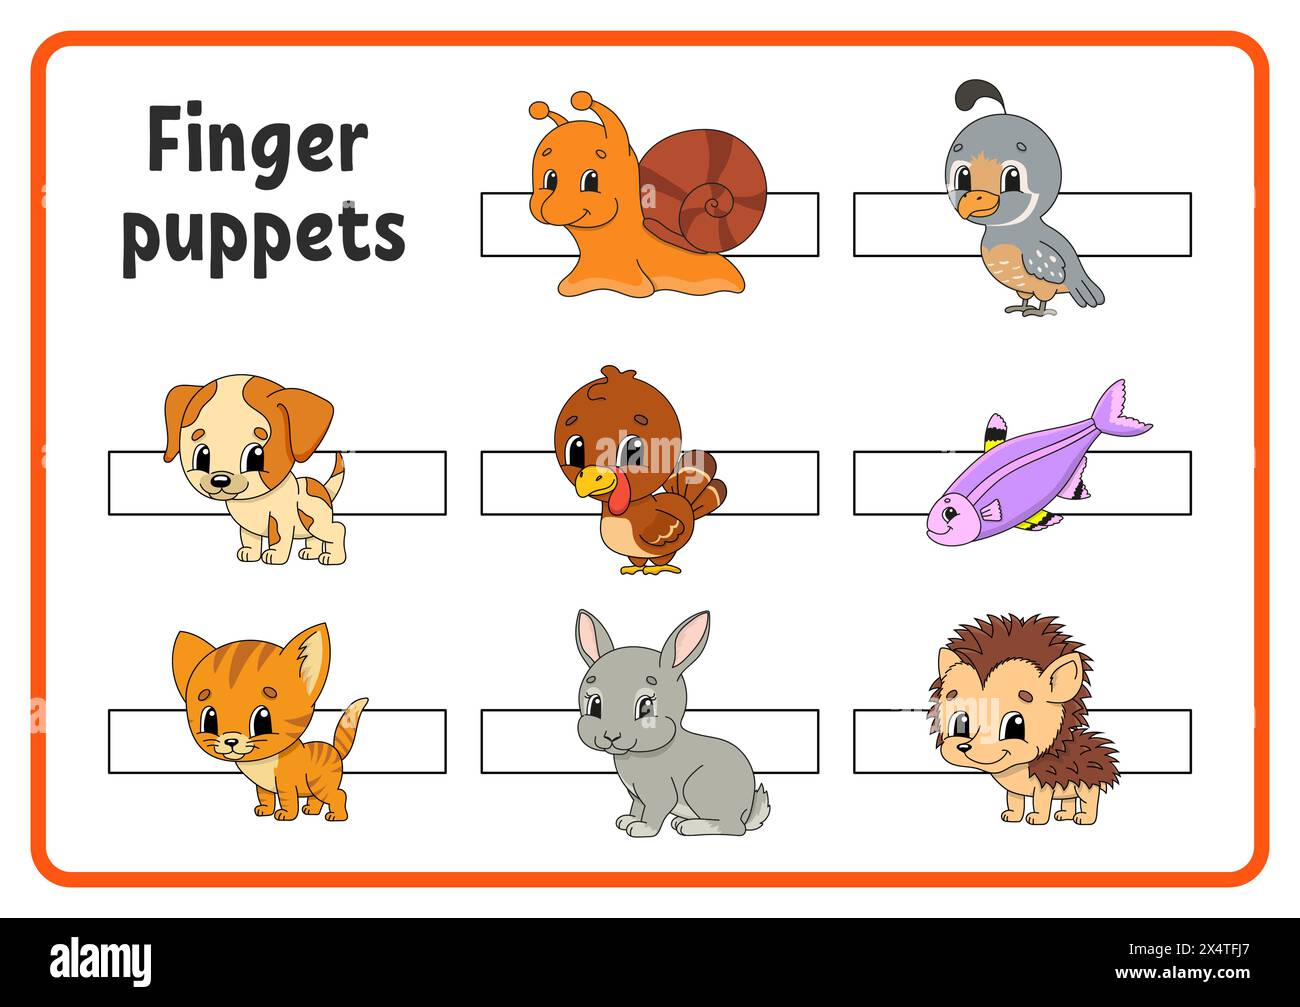 Finger puppets. Activities for kids. Cute cartoon characters. Vector illustration. Stock Vector